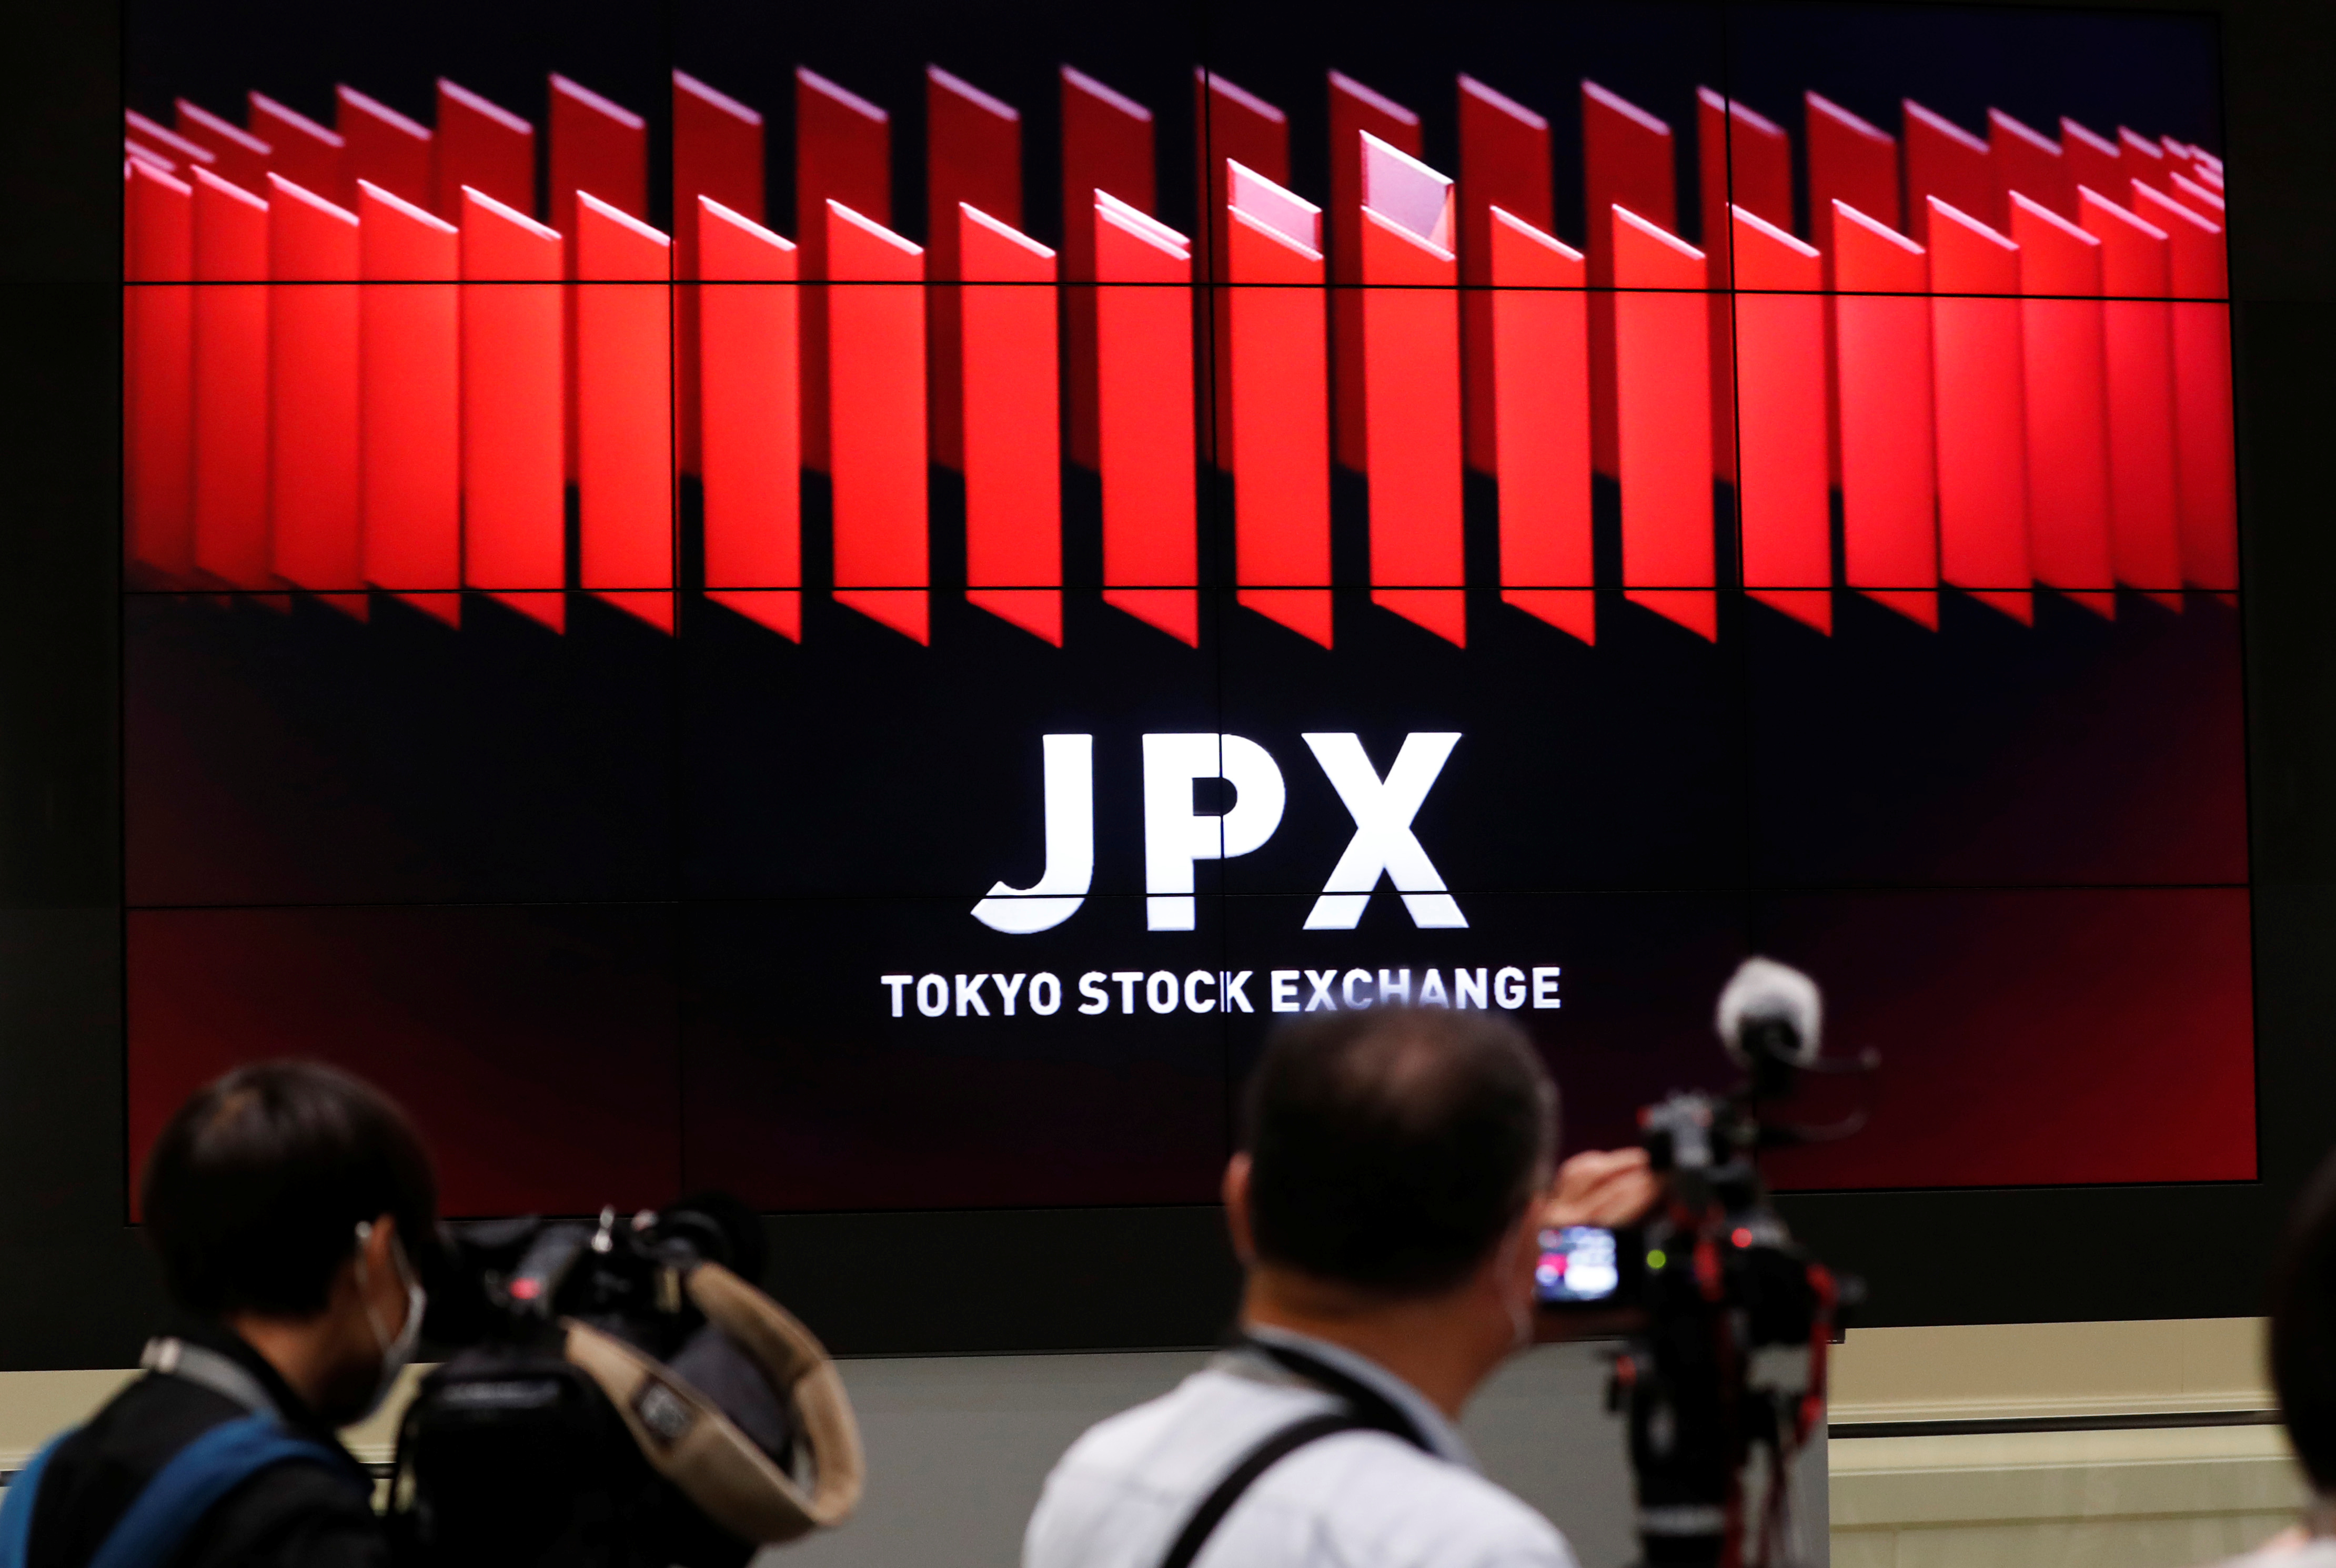 TV camera men wait for the opening of market in front of a large screen showing stock prices at the Tokyo Stock Exchange in Tokyo, Japan October 2, 2020. REUTERS/Kim Kyung-Hoon